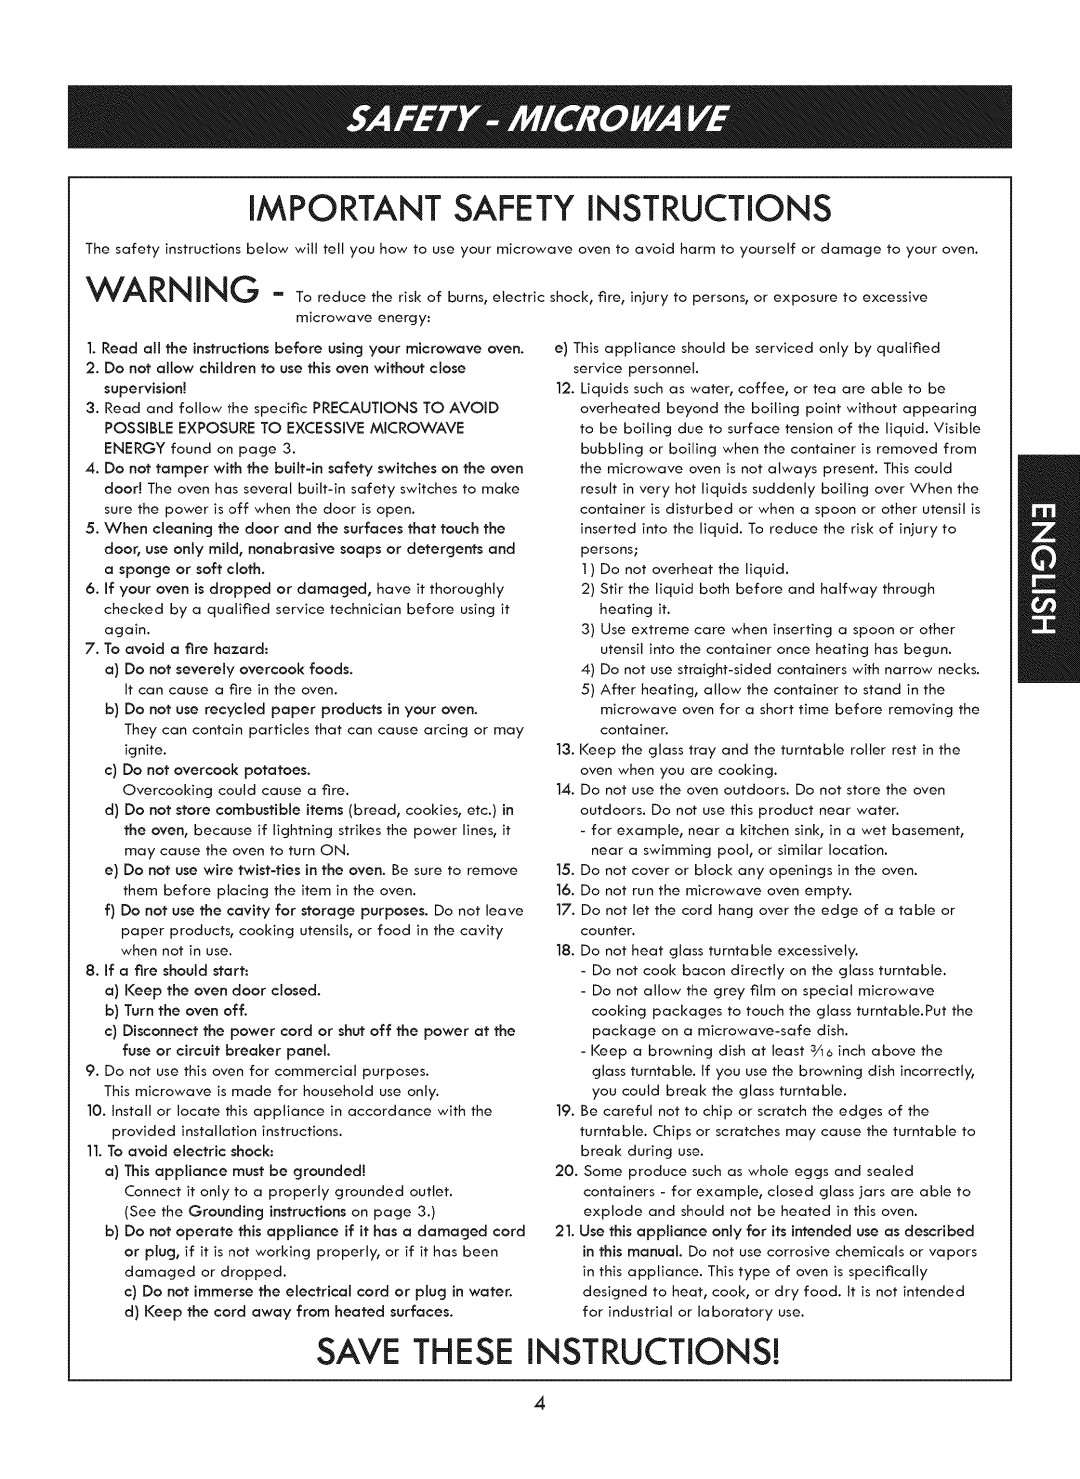 Kenmore 721. 7920 manual iMPORTANT SAFETY iNSTRUCTiONS, SAVE THESE iNSTRUCTiONS 